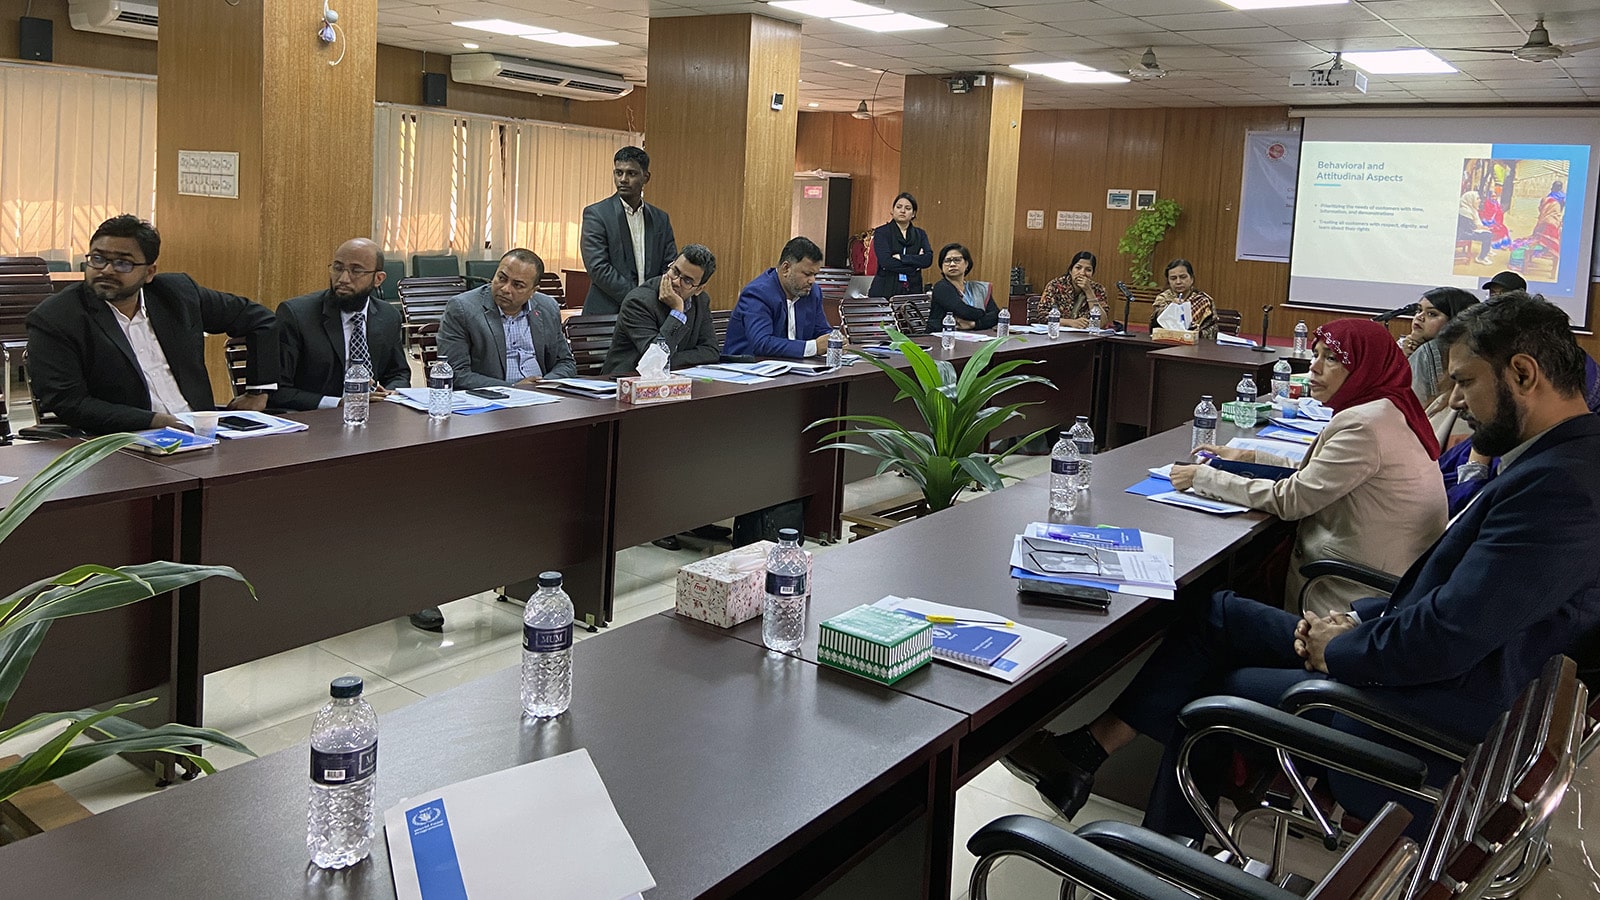 Representatives from various financial service providers such as bKash, Nagad, One Bank, Dutch-Bangla Bank, and Banglalink discussed how they could cascade the guidelines among their agents and work with other system actors.